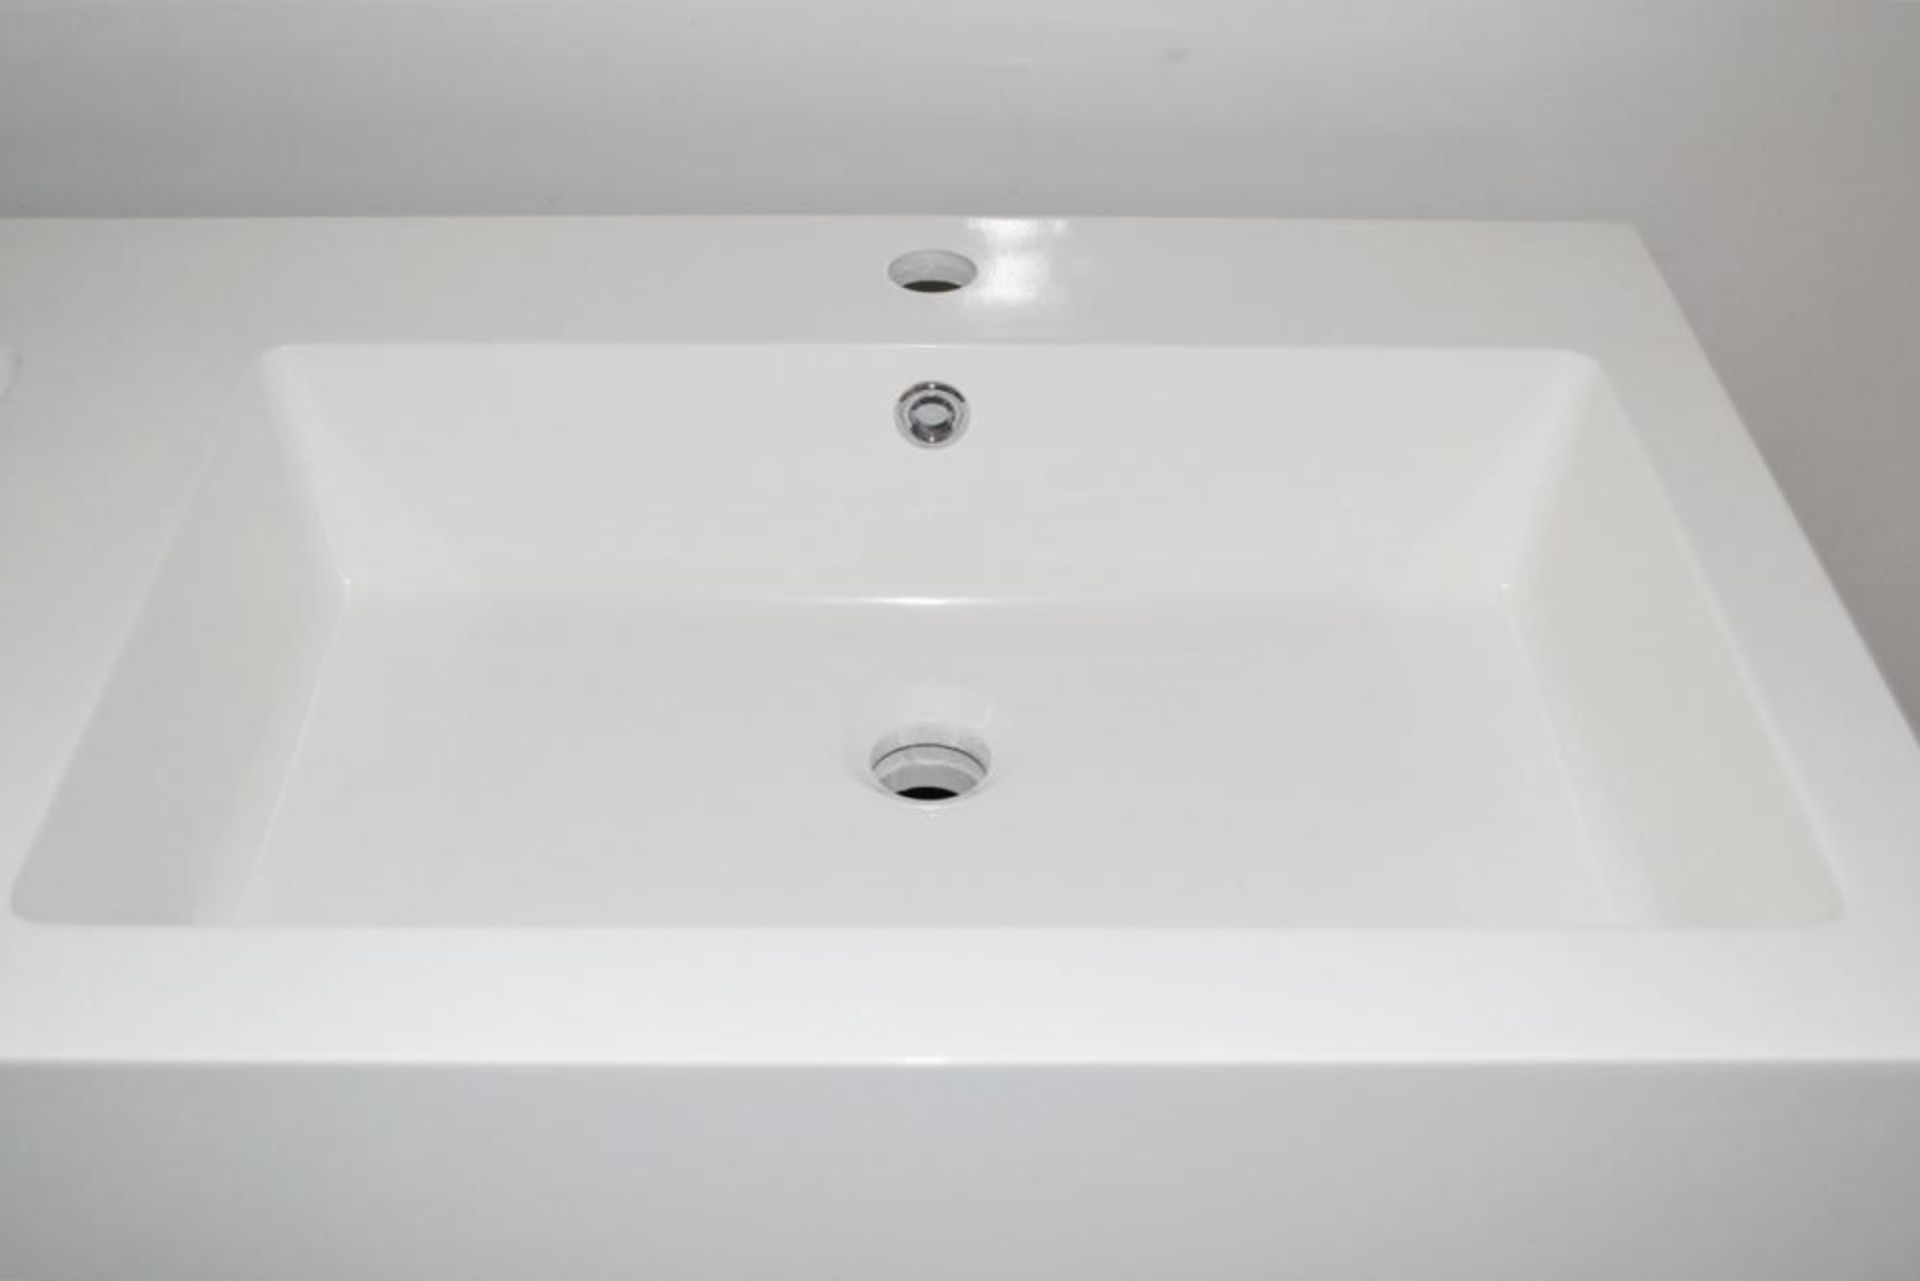 1 x Gloss White 1200mm 4-Door Double Basin Freestanding Bathroom Cabinet - New & Boxed Stock - CL307 - Image 5 of 6